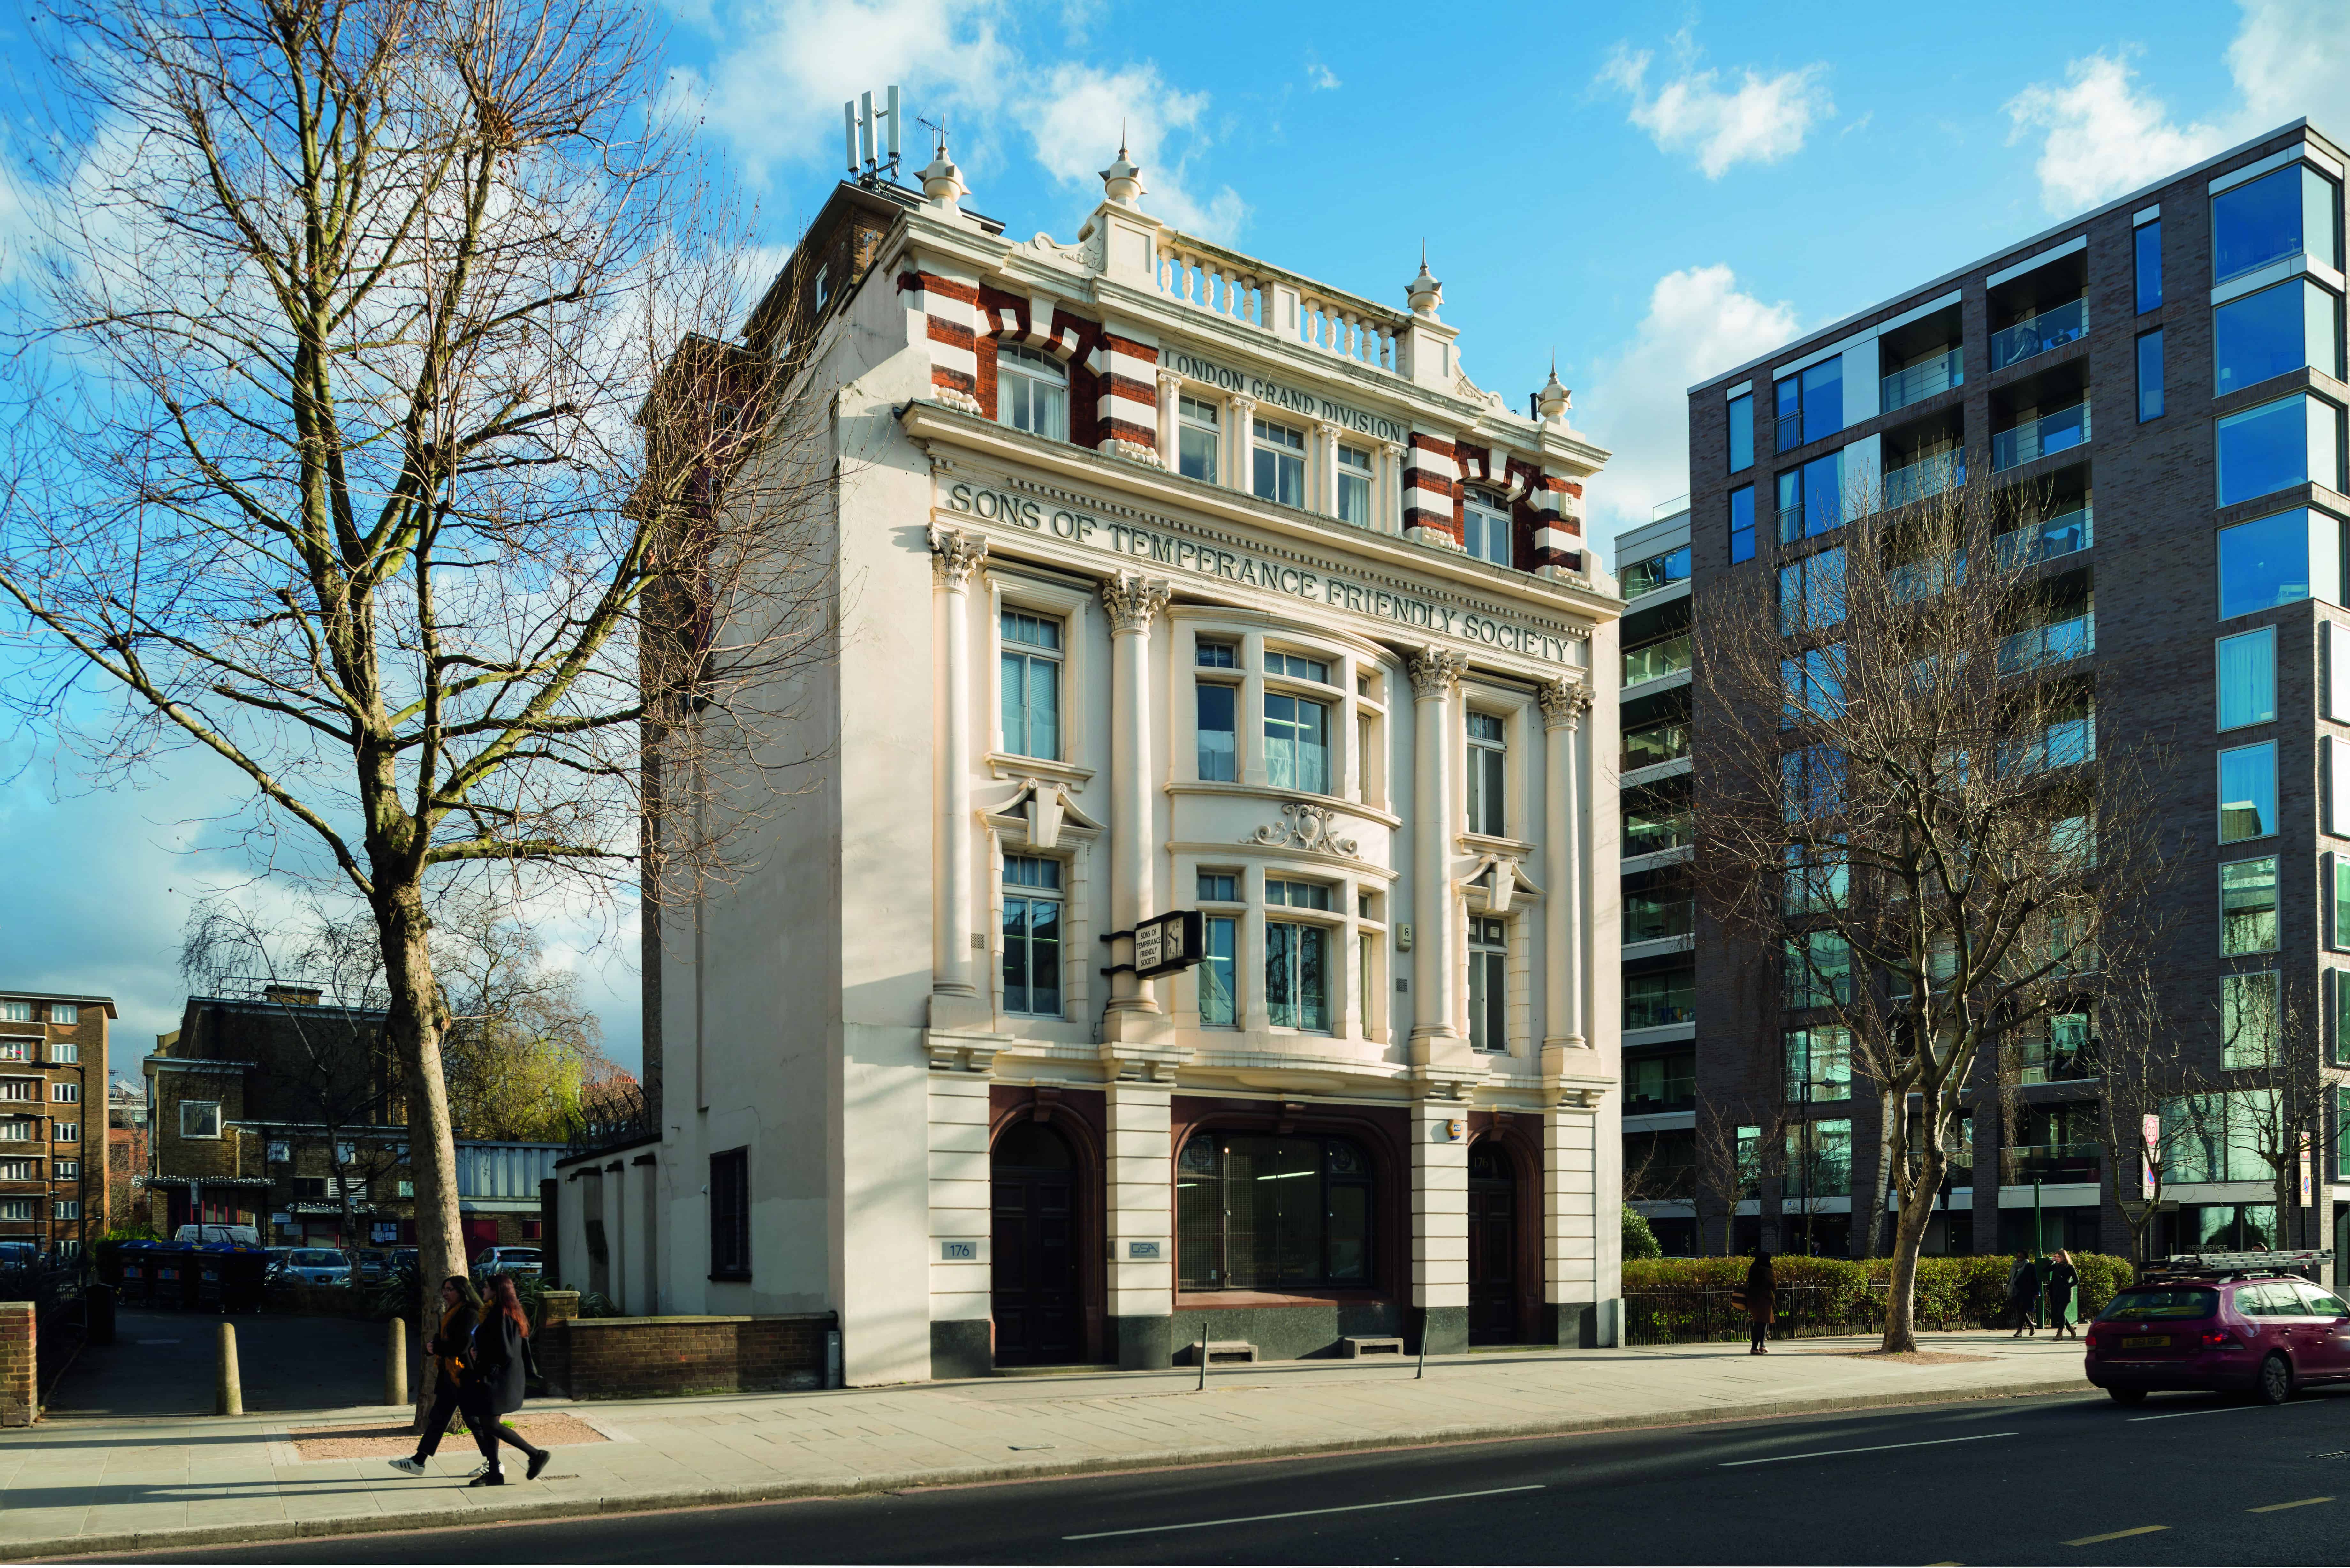 The building on Blackfriars Road was sold for more than £4million